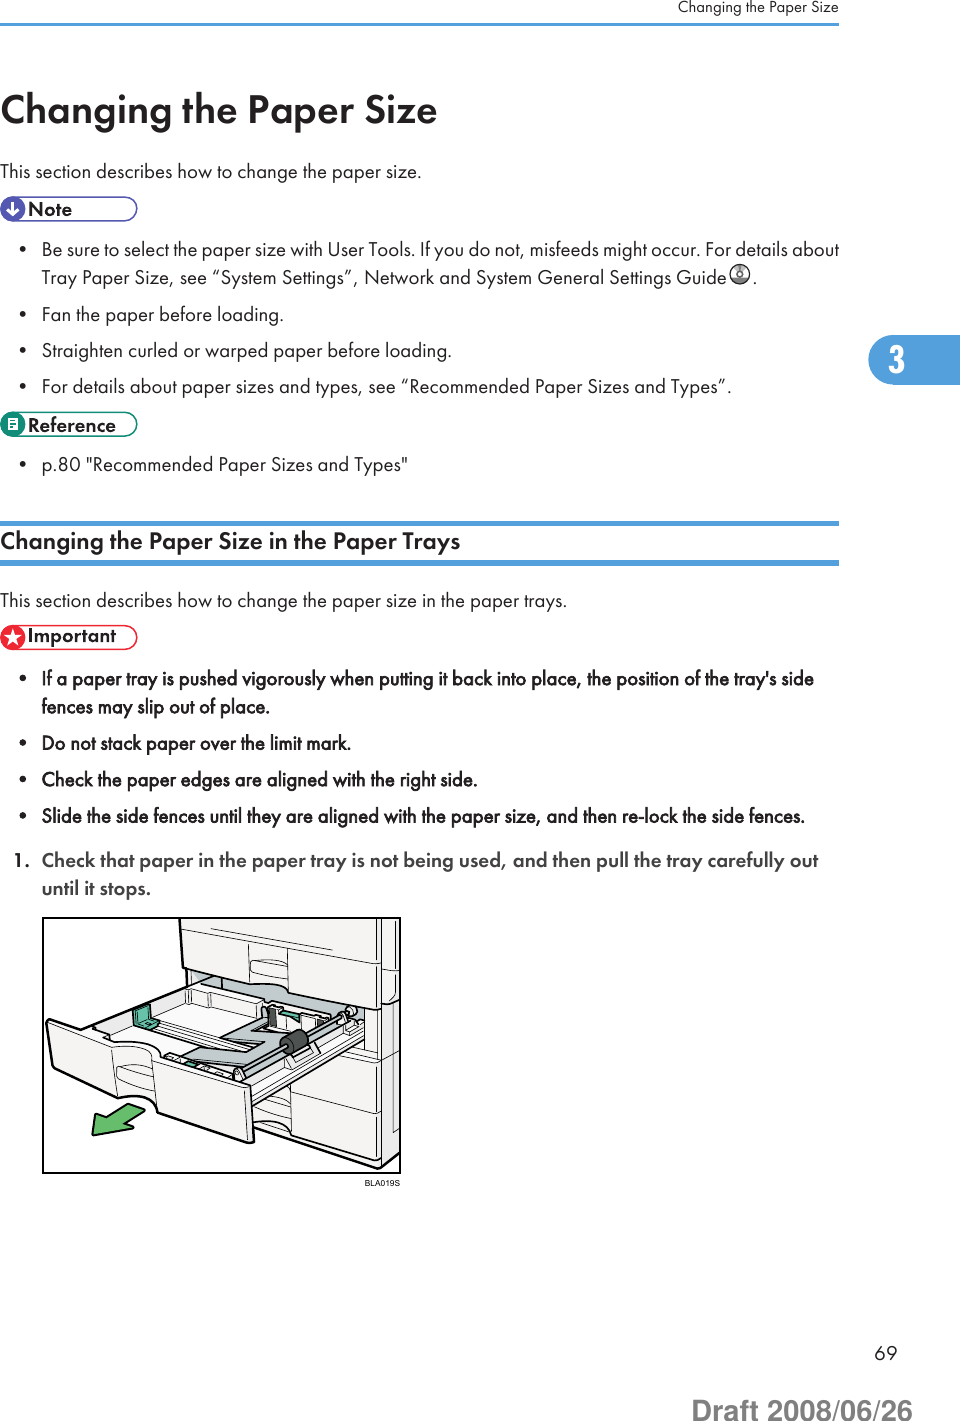 Changing the Paper SizeThis section describes how to change the paper size.• Be sure to select the paper size with User Tools. If you do not, misfeeds might occur. For details aboutTray Paper Size, see “System Settings”, Network and System General Settings Guide .• Fan the paper before loading.• Straighten curled or warped paper before loading.• For details about paper sizes and types, see “Recommended Paper Sizes and Types”.• p.80 &quot;Recommended Paper Sizes and Types&quot;Changing the Paper Size in the Paper TraysThis section describes how to change the paper size in the paper trays.• If a paper tray is pushed vigorously when putting it back into place, the position of the tray&apos;s sidefences may slip out of place.• Do not stack paper over the limit mark.• Check the paper edges are aligned with the right side.• Slide the side fences until they are aligned with the paper size, and then re-lock the side fences.1. Check that paper in the paper tray is not being used, and then pull the tray carefully outuntil it stops.BLA019SChanging the Paper Size693Draft 2008/06/26